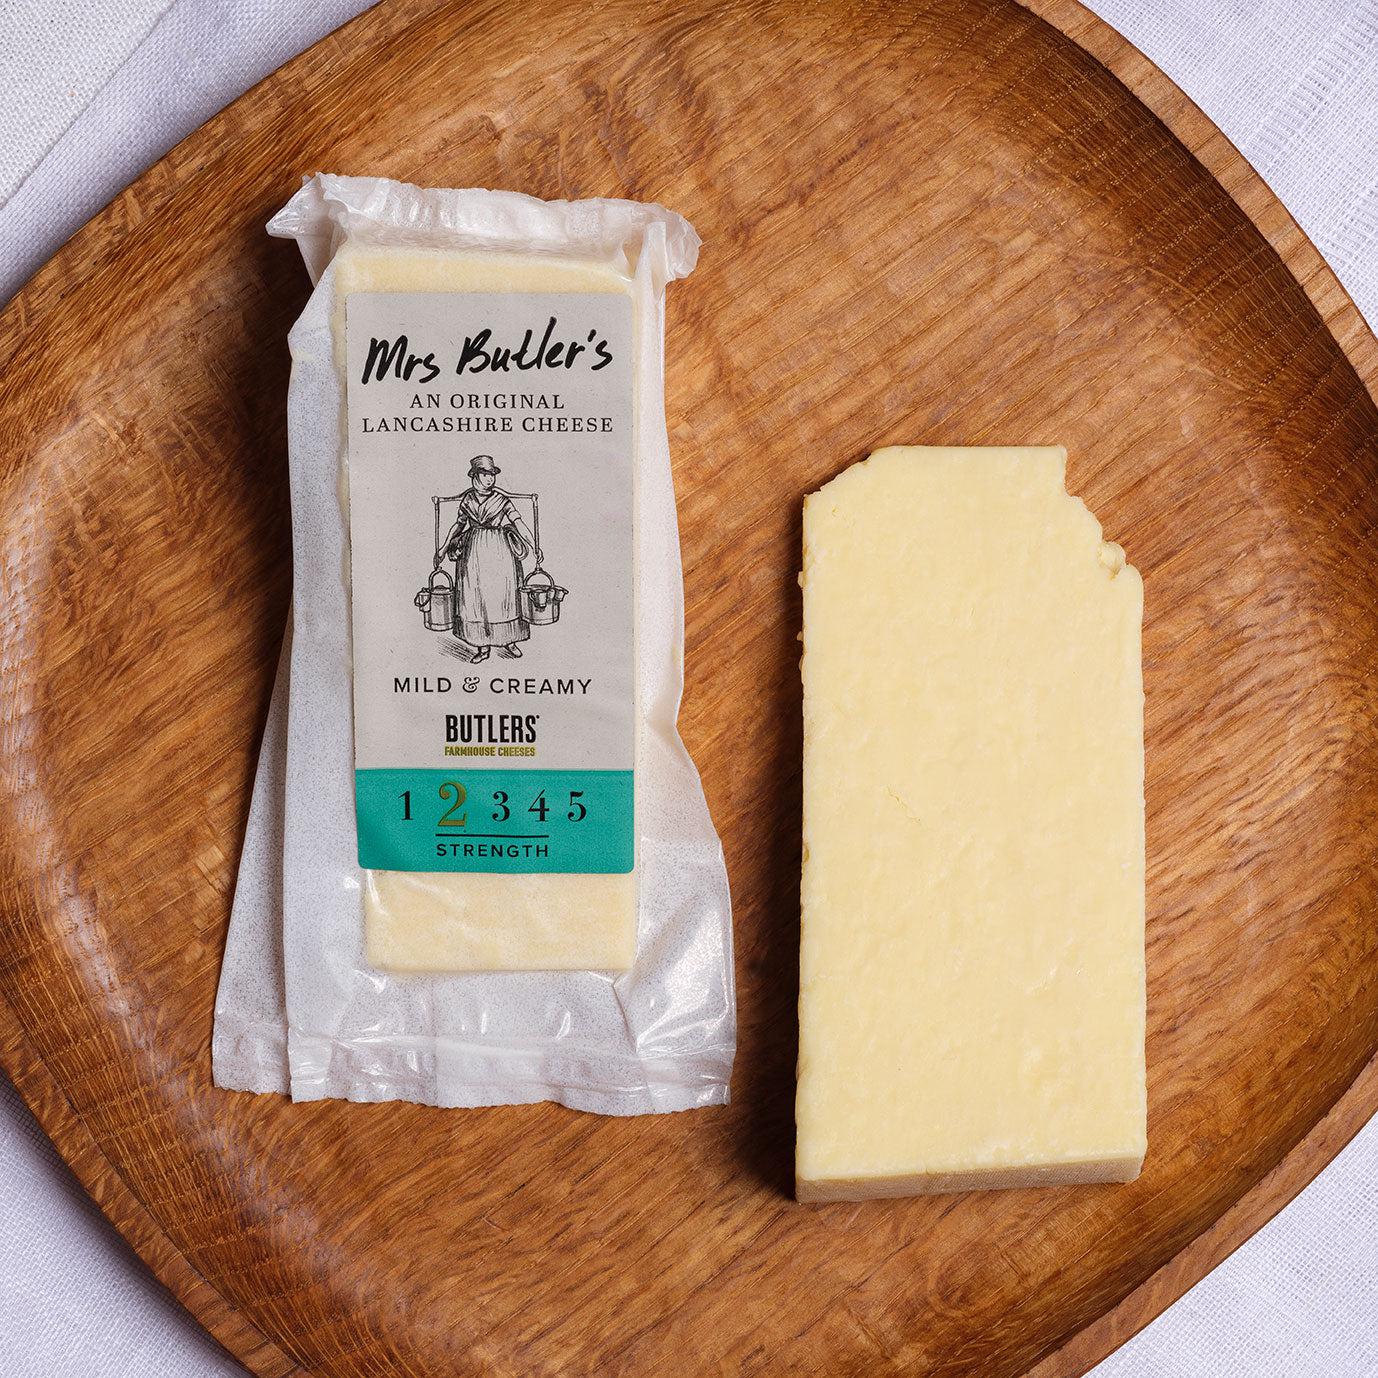 Mrs Butler's Farmhouse Creamy Lancashire Cheese on a wooden plate in it's packaging and also as a 200gm cheese wedge.